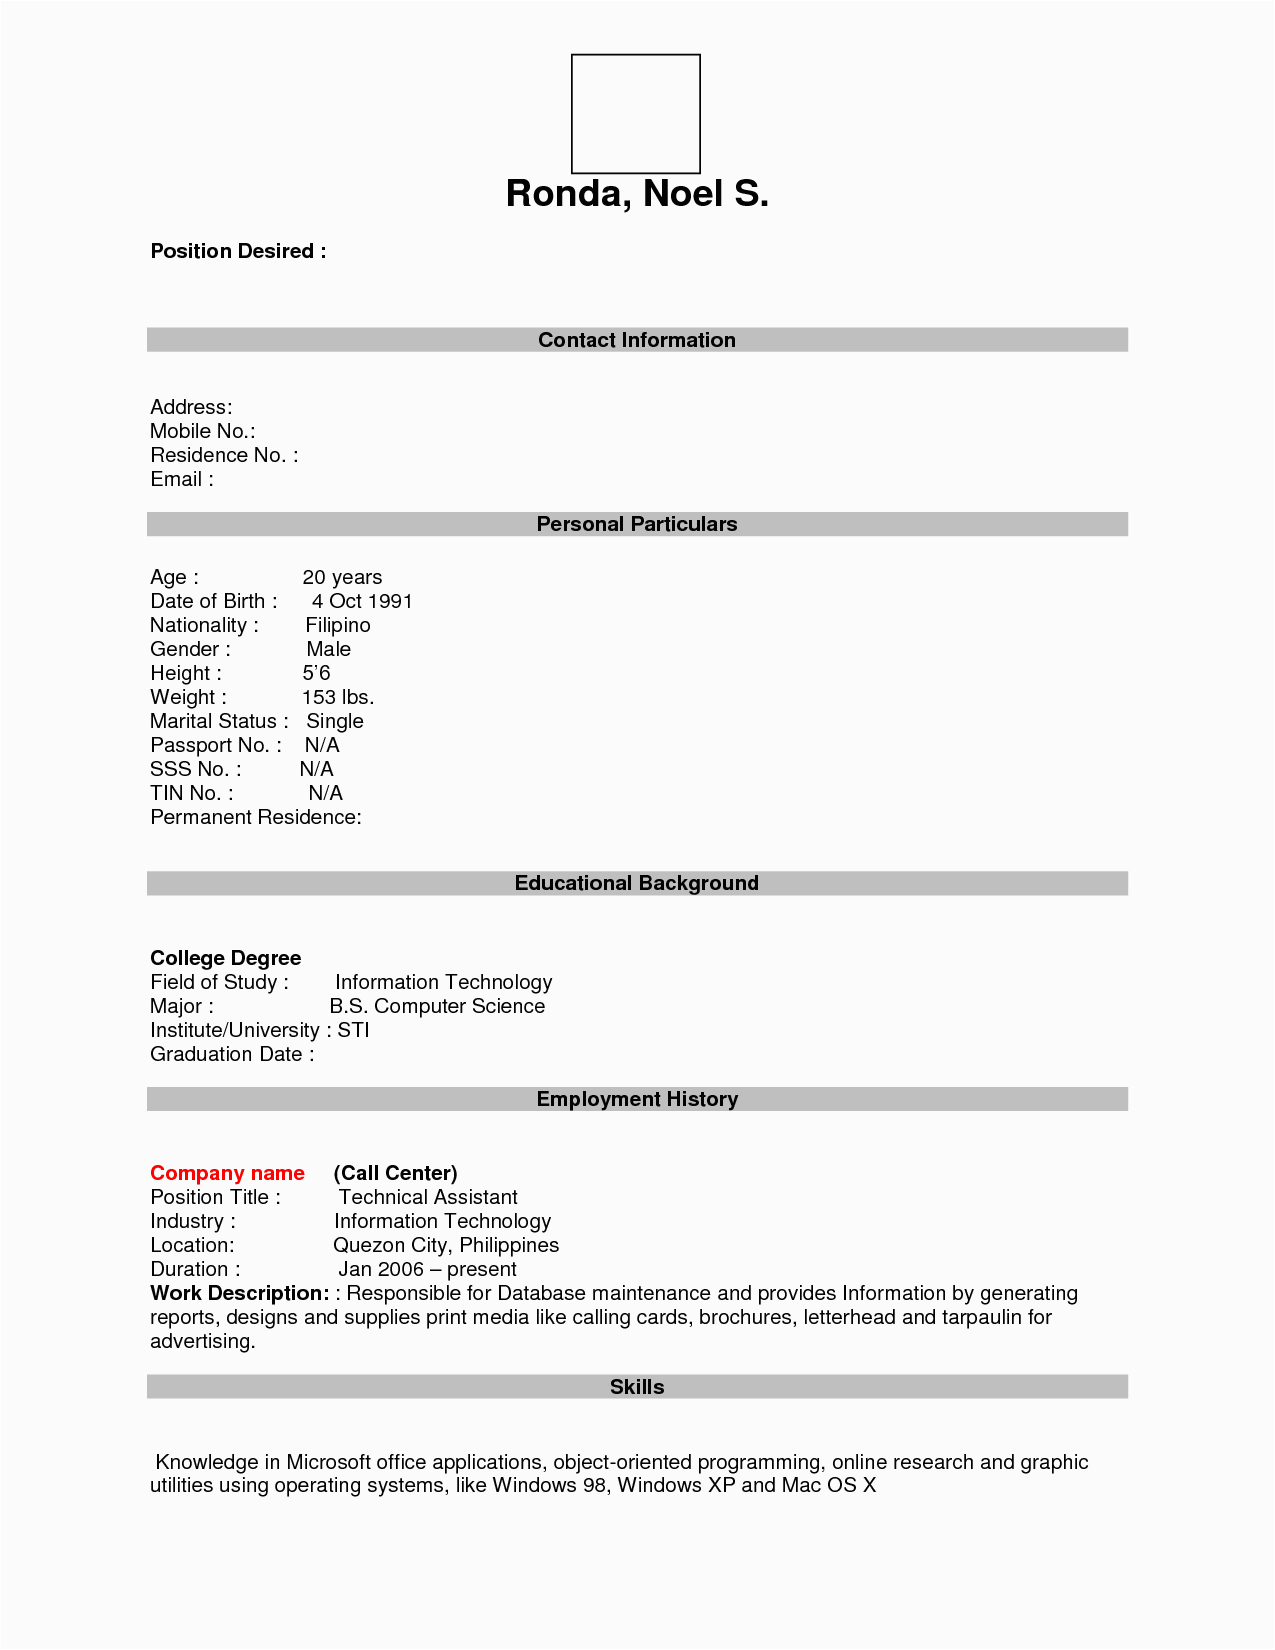 Changing the formatting On A Pre formatted Sample Resume Cv format Pdf Downloadable Blank Resume Template Resume In Word